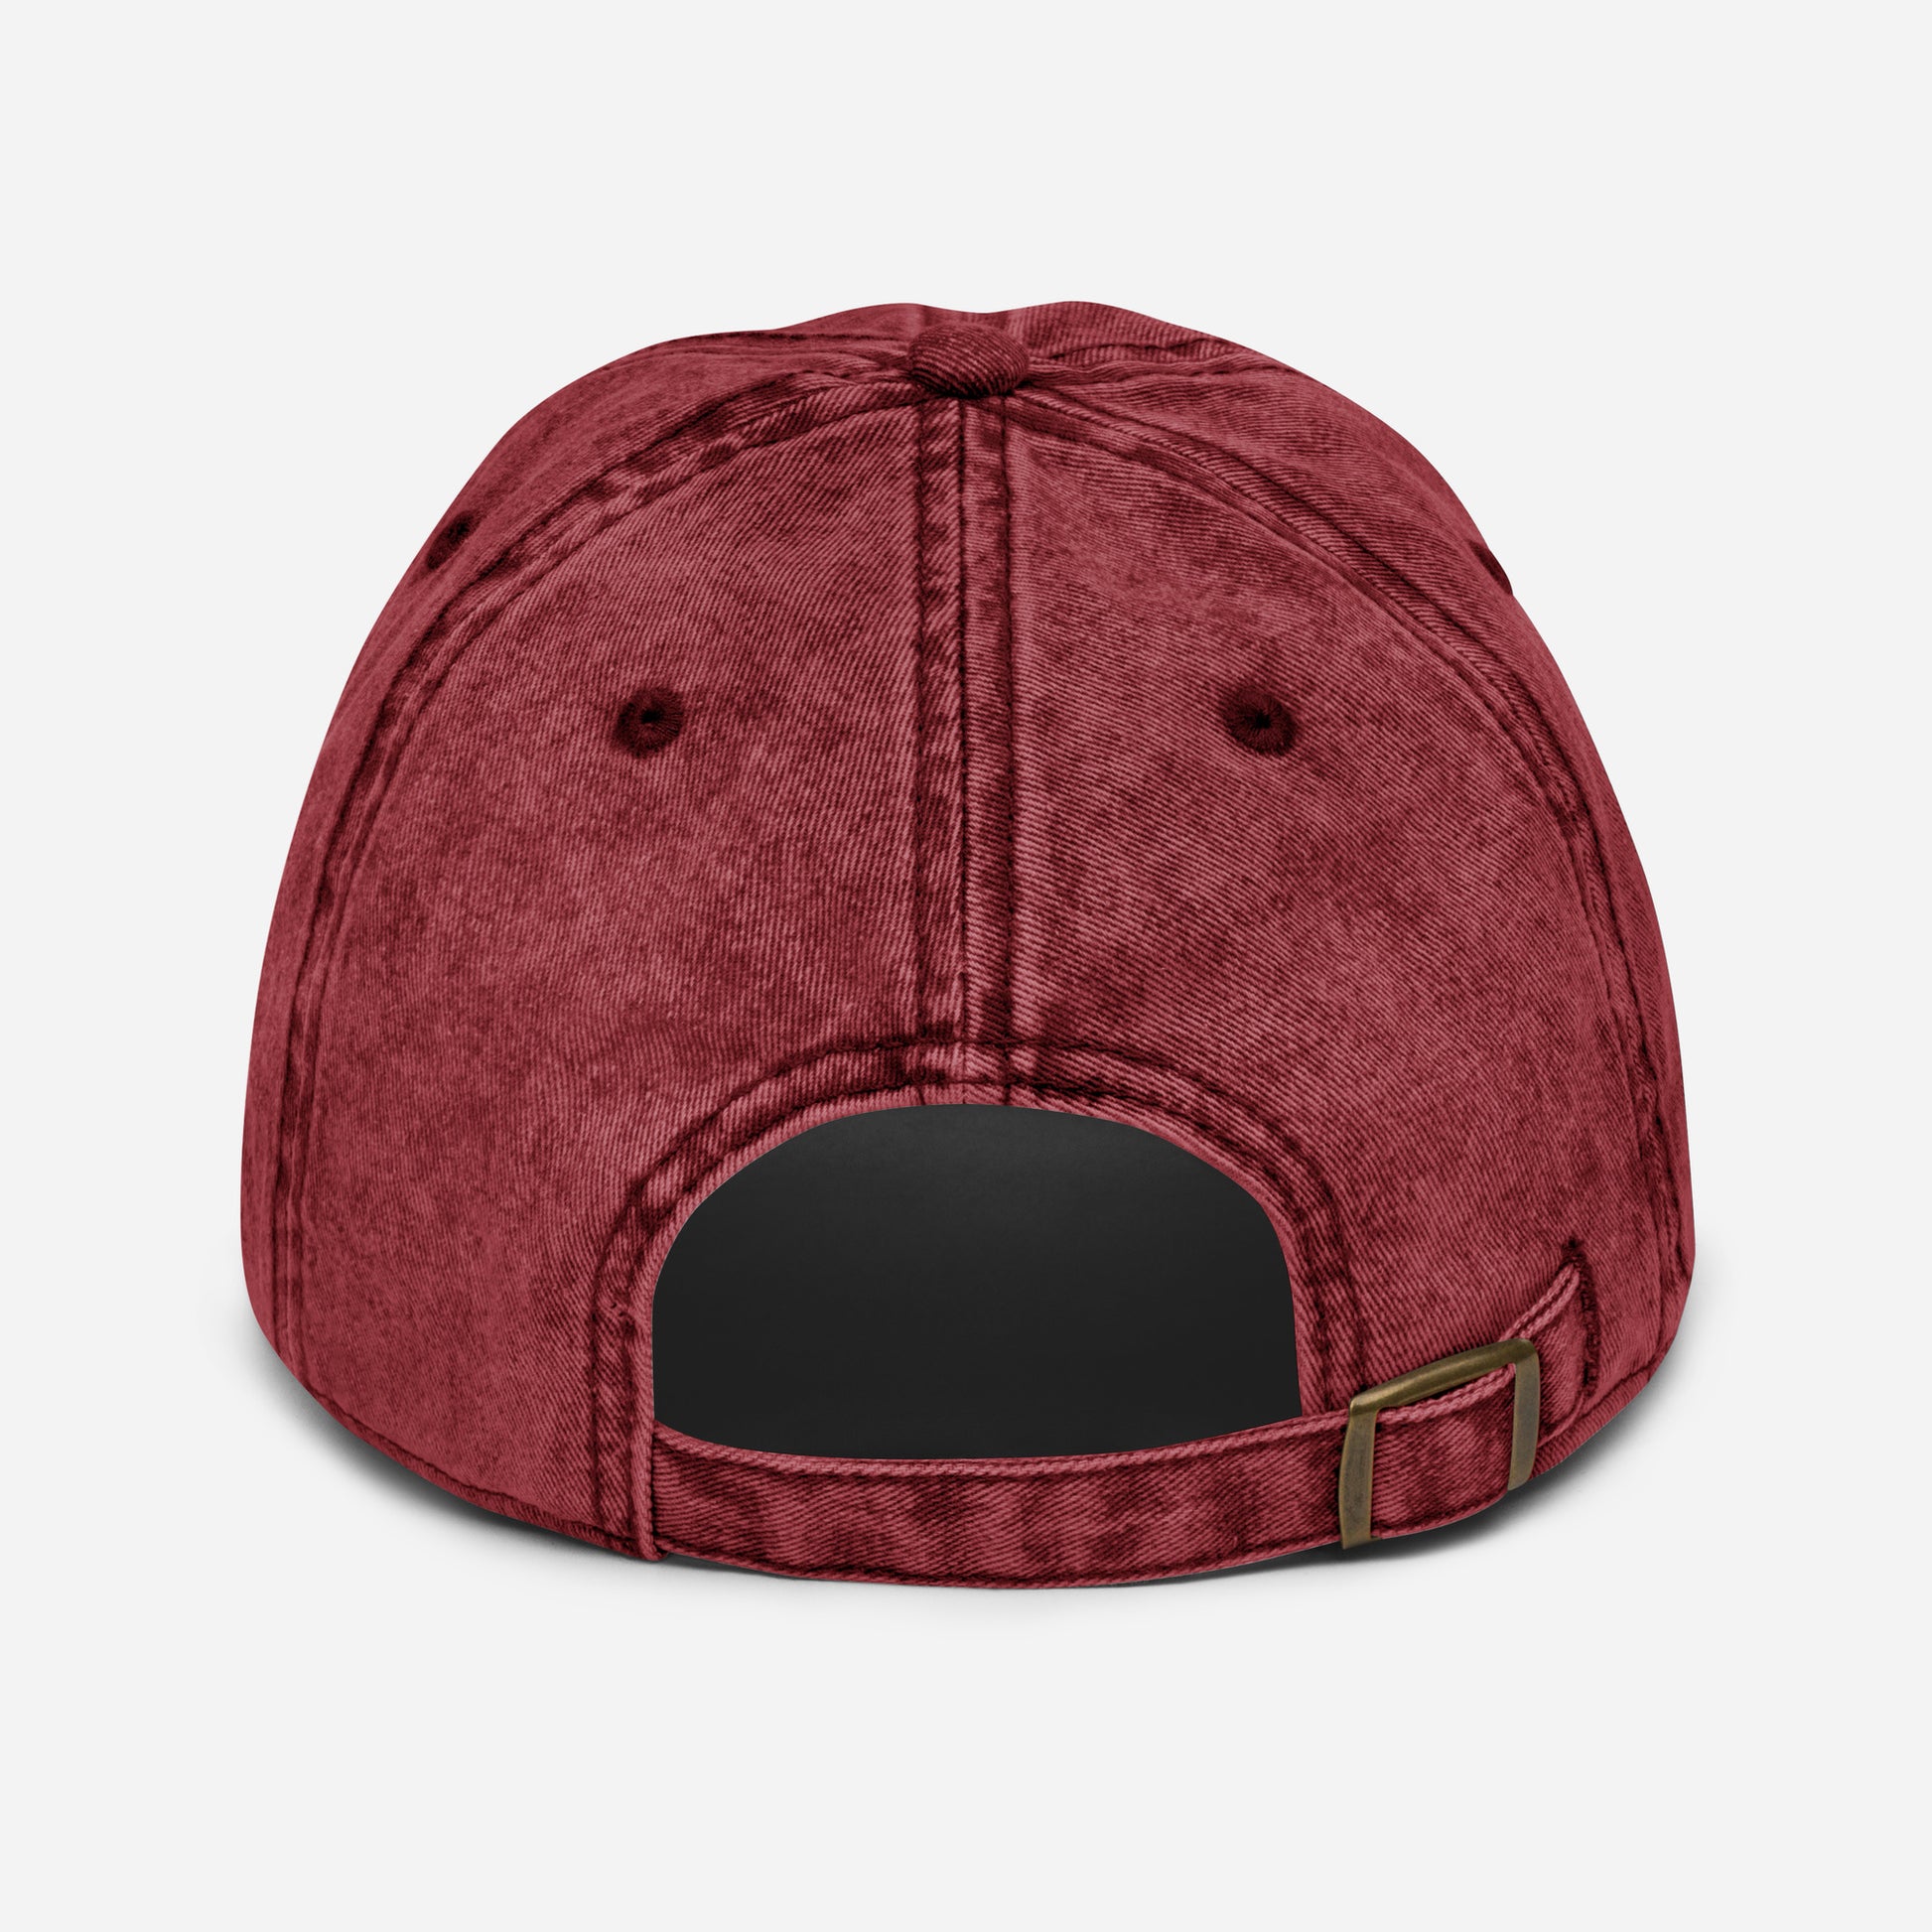 cap-from-the-back-with-cartoon-symbol